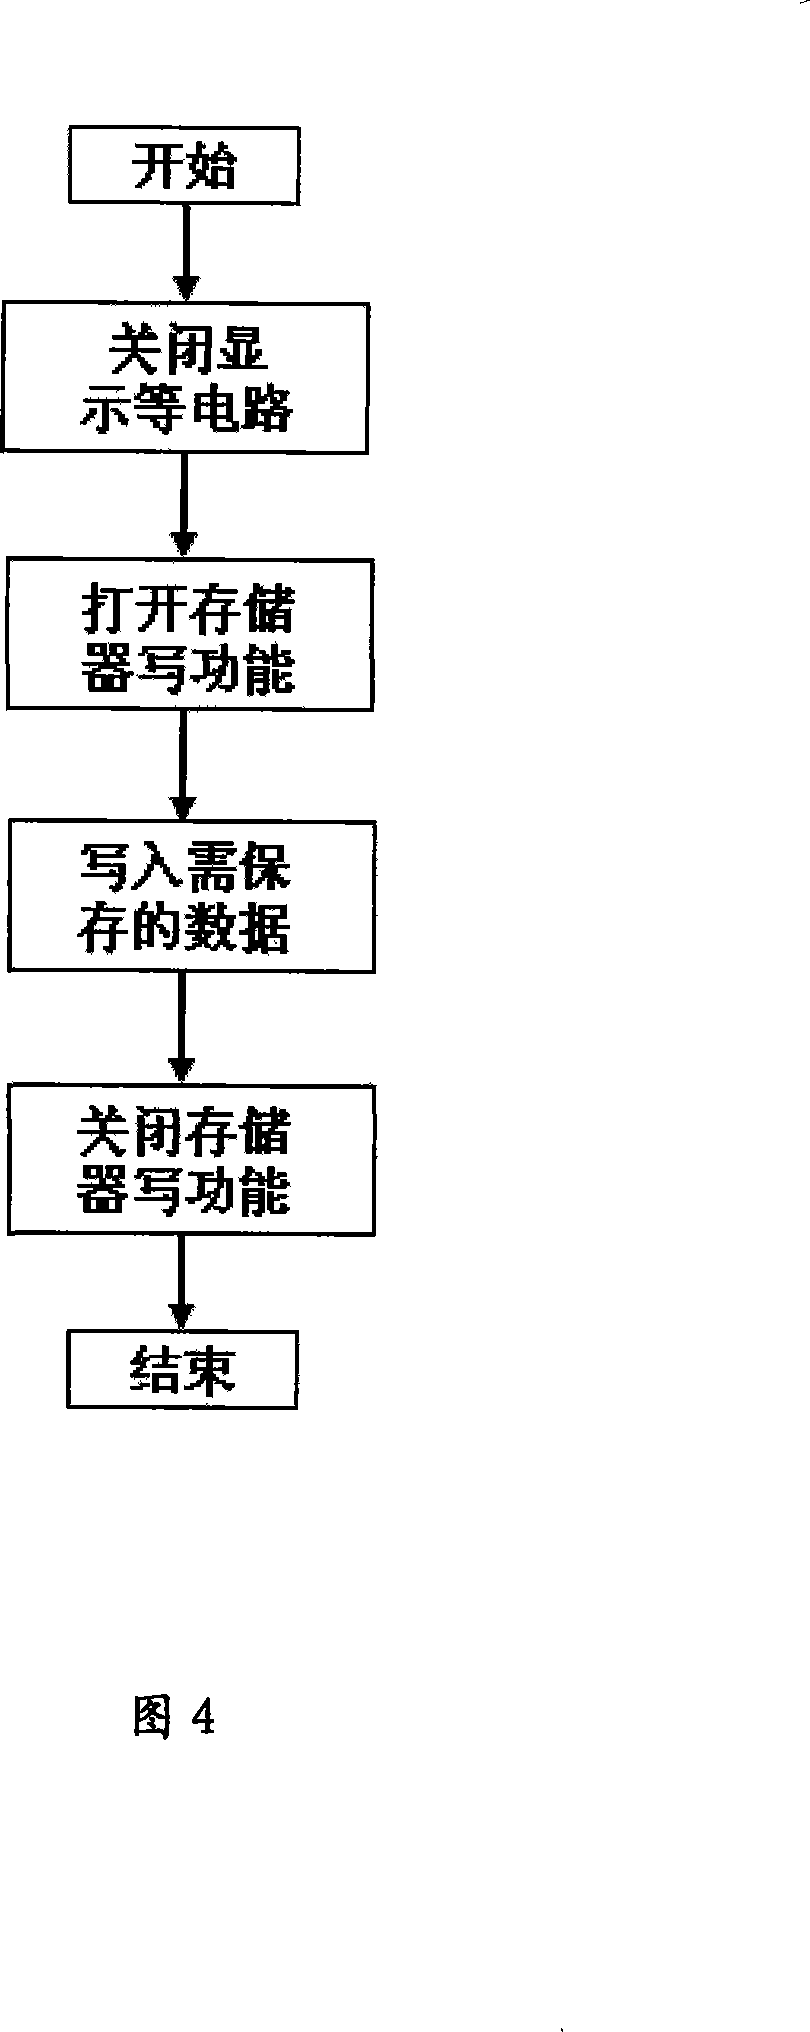 Data protection circuit in singlechip system power off and method thereof